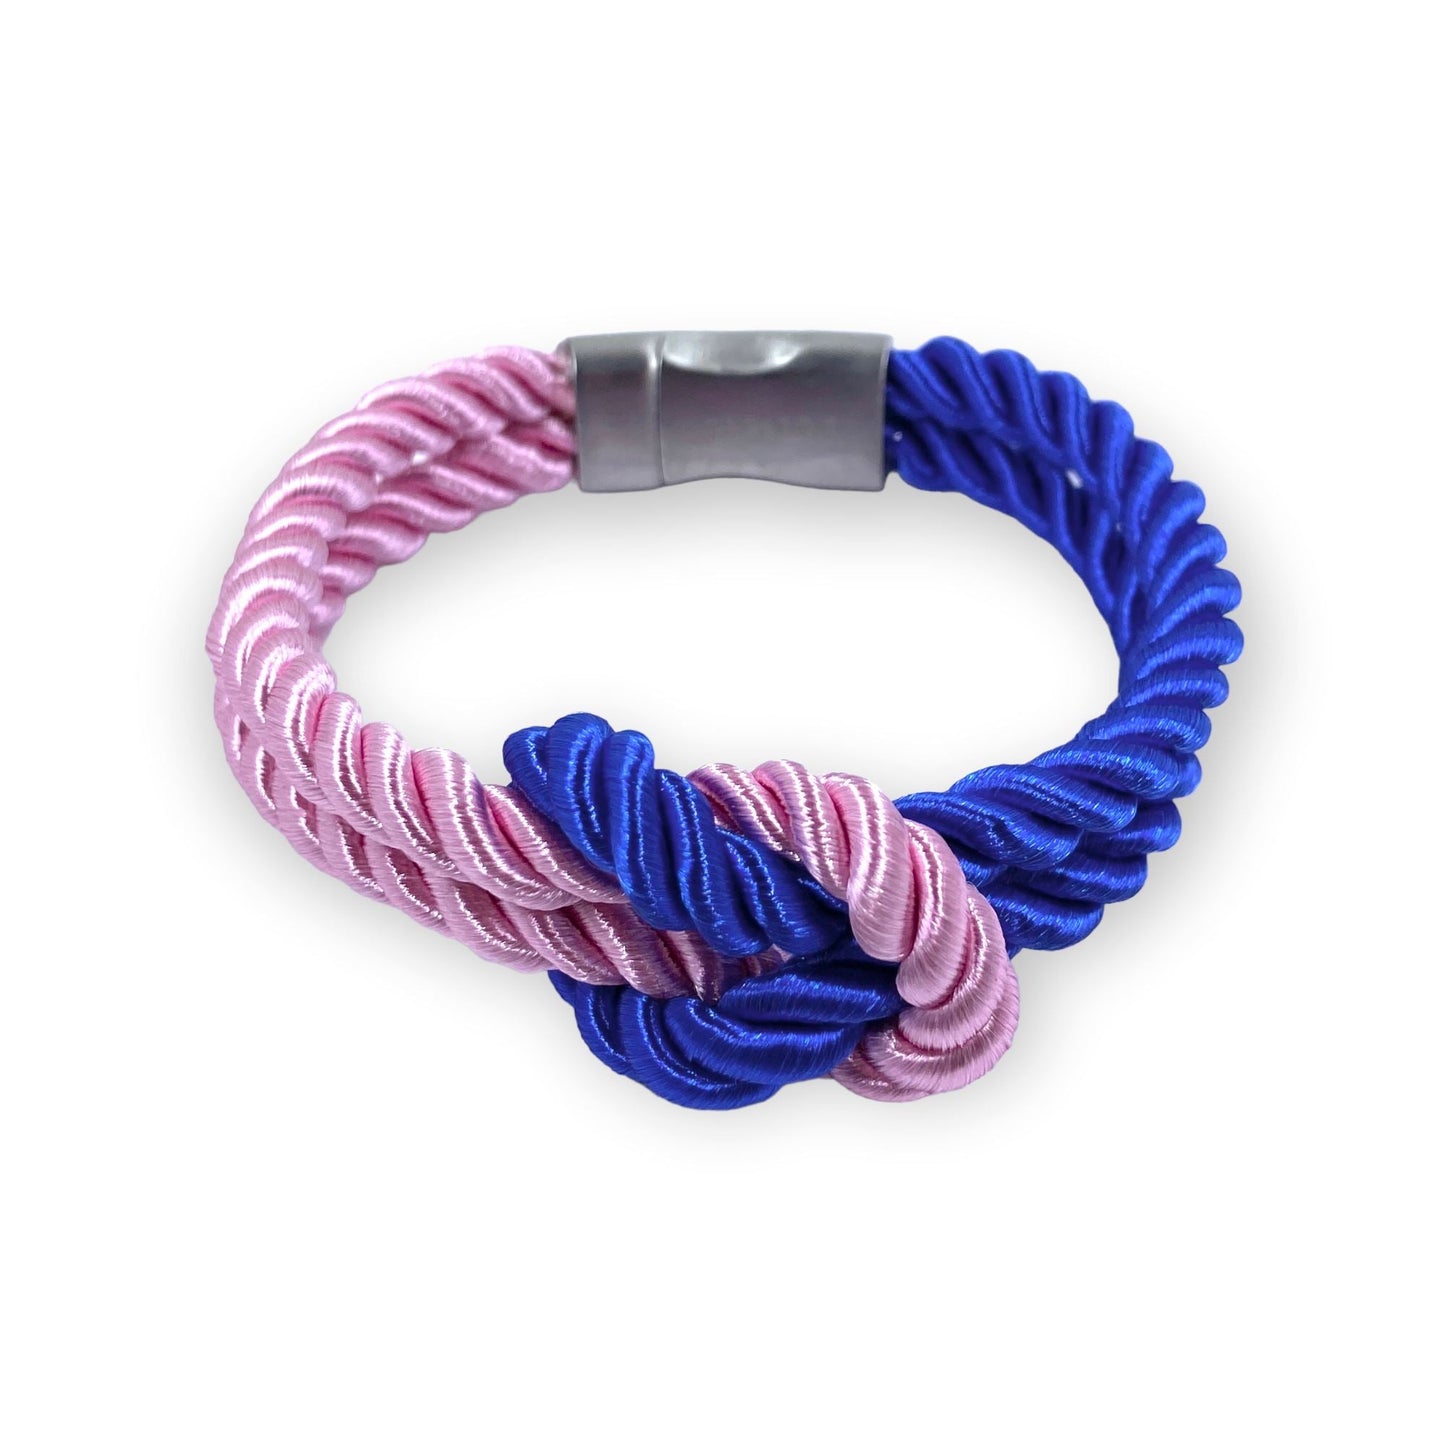 The Original Love Knot Satin Rope Bracelet- Blue and Pink Bracelets Trendzio Blue and Pink 